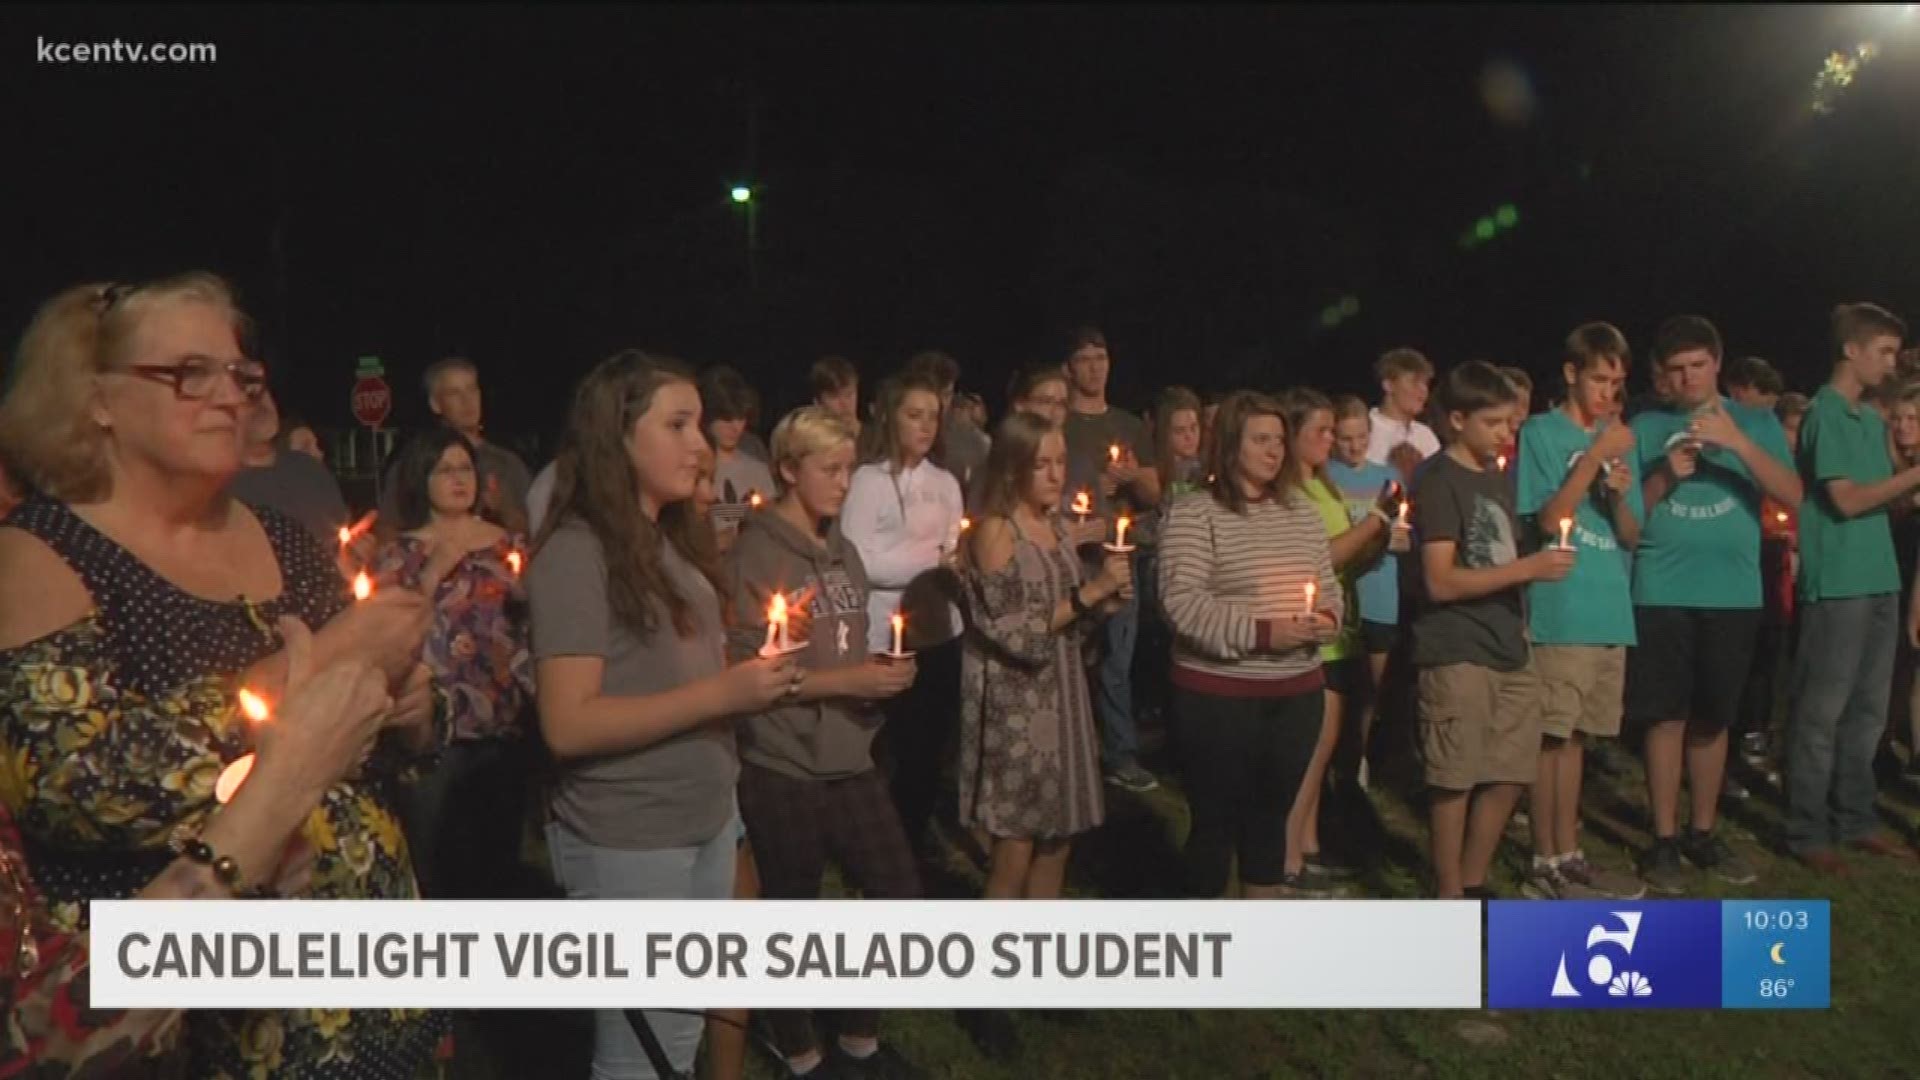 The Salado community banded together to pray for a student who is in critical condition after falling from the trunk of a moving vehicle.